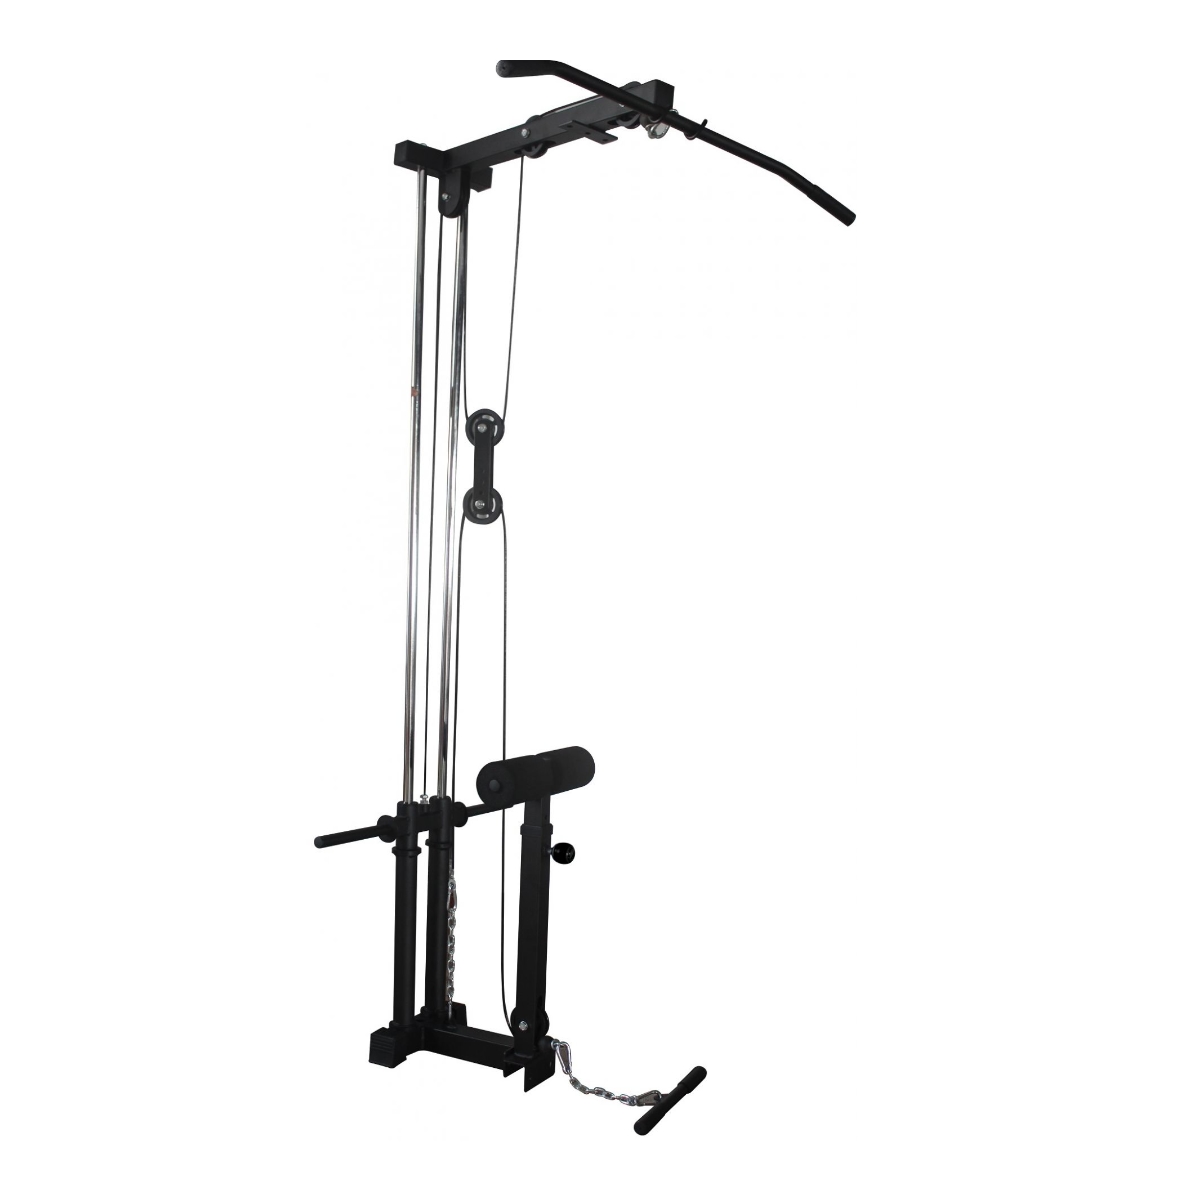 Masterfit LAT Pull, X-fit Cage